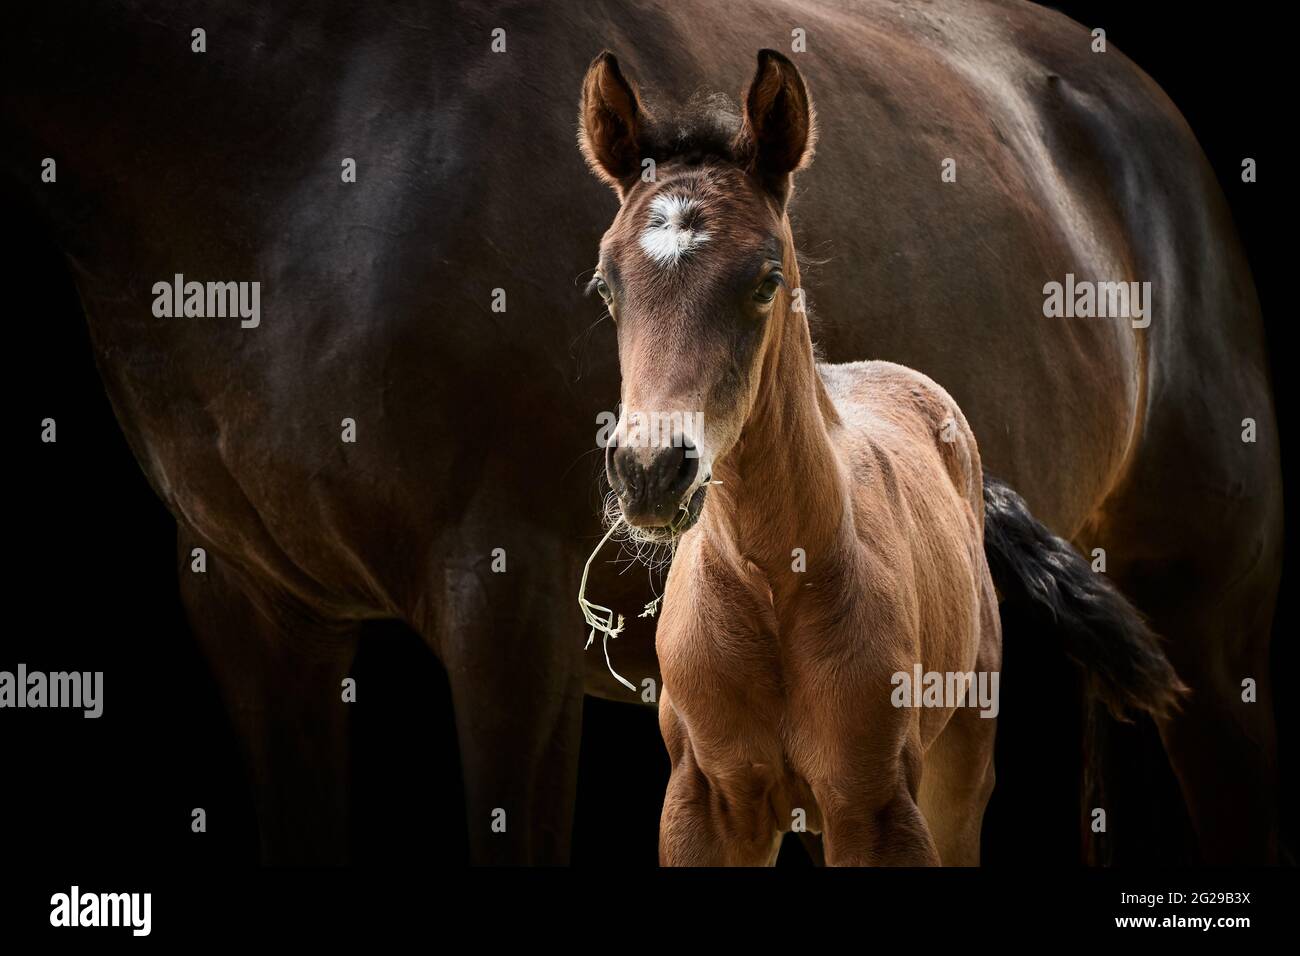 Thoroughbred filly foal horse standing close to mare isolated on black background. Stock Photo